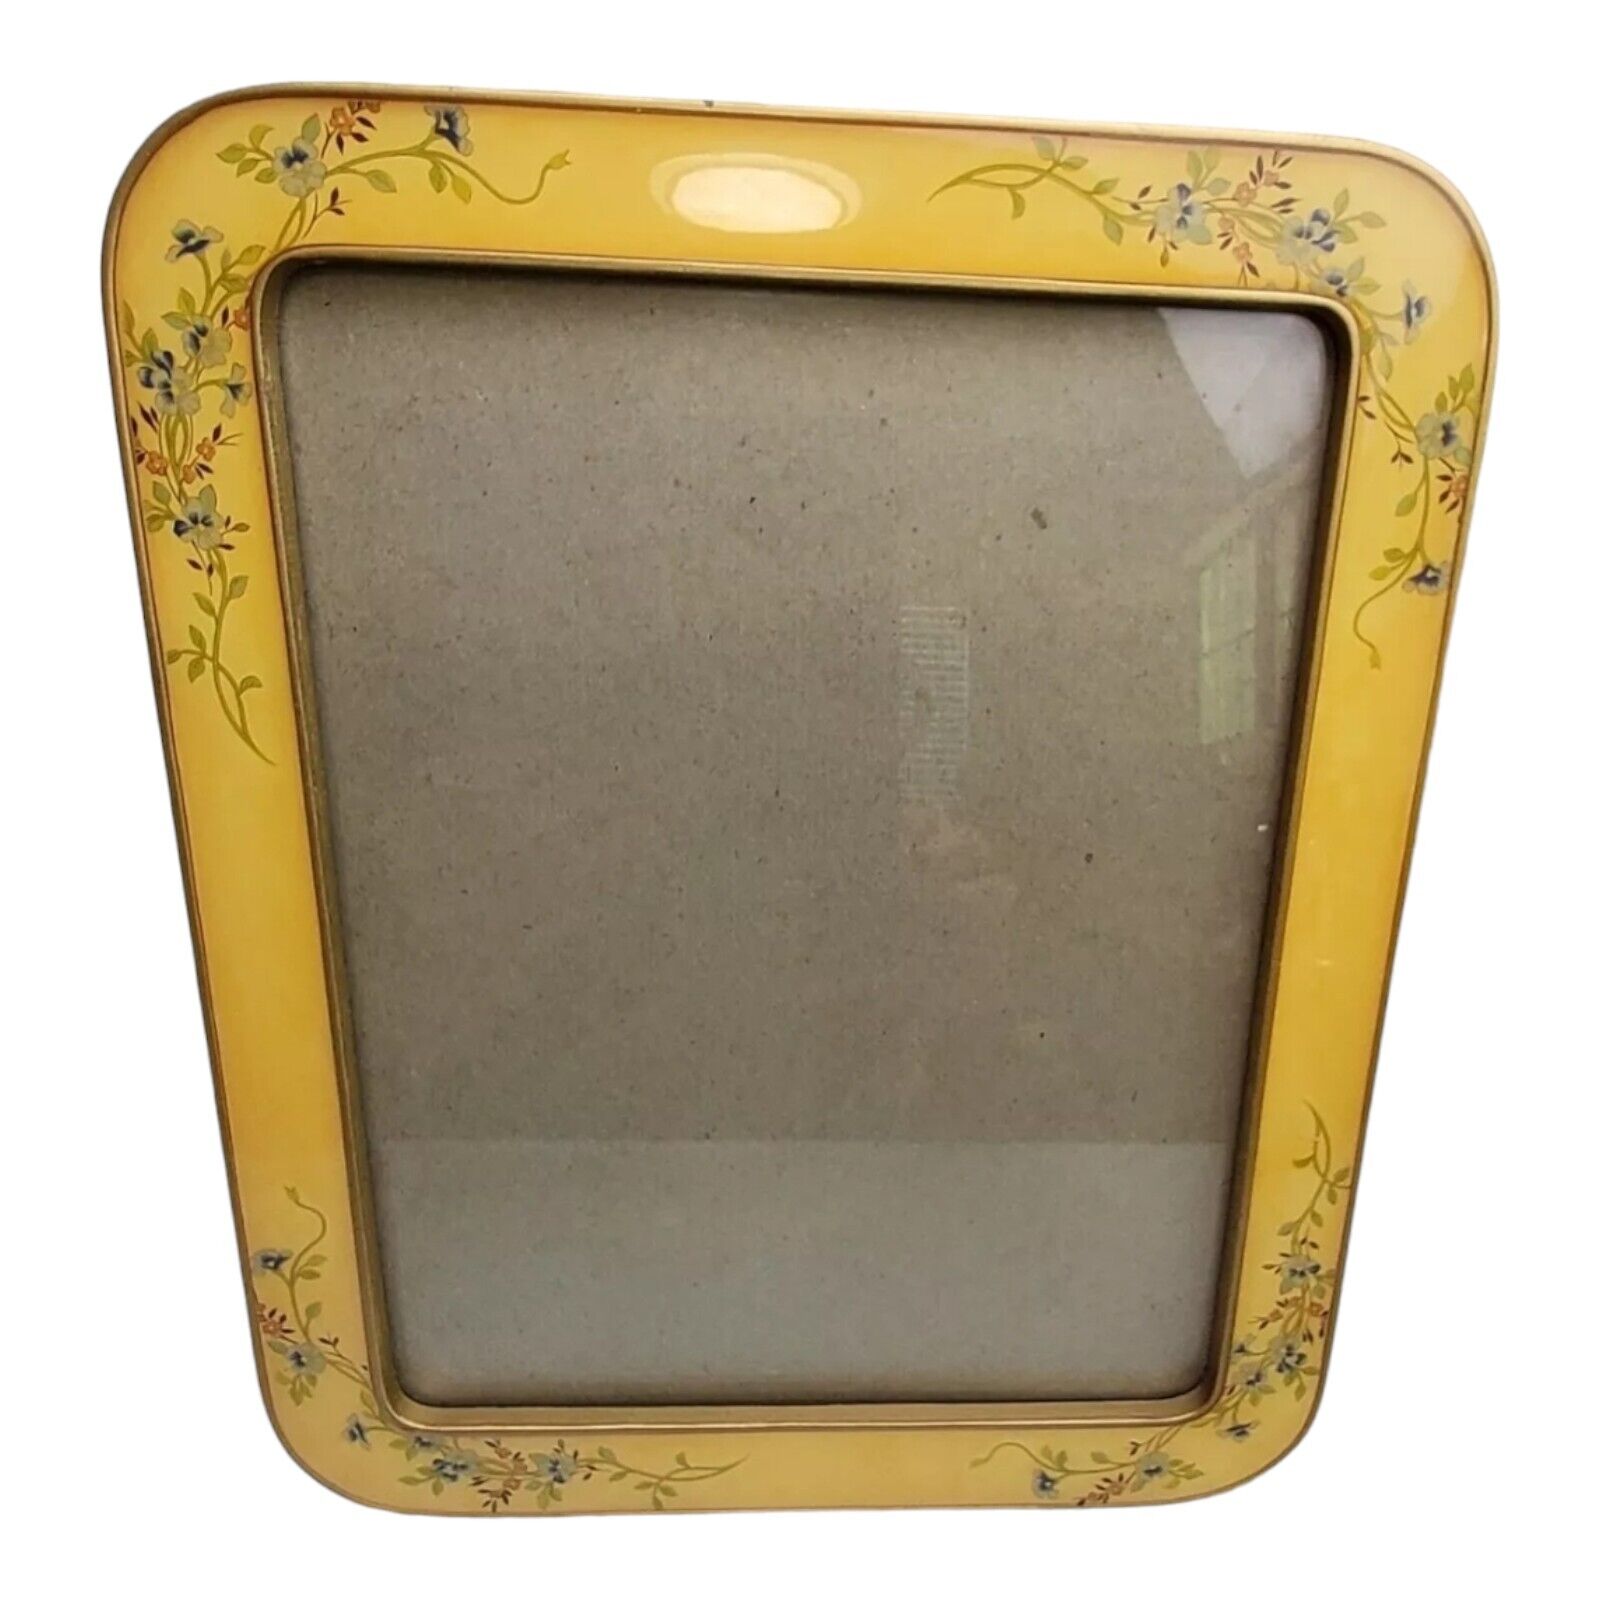 Vintage The Bucklers 8x10 Swivel Back Floral Enamel Photo Frame Hand Crafted USA